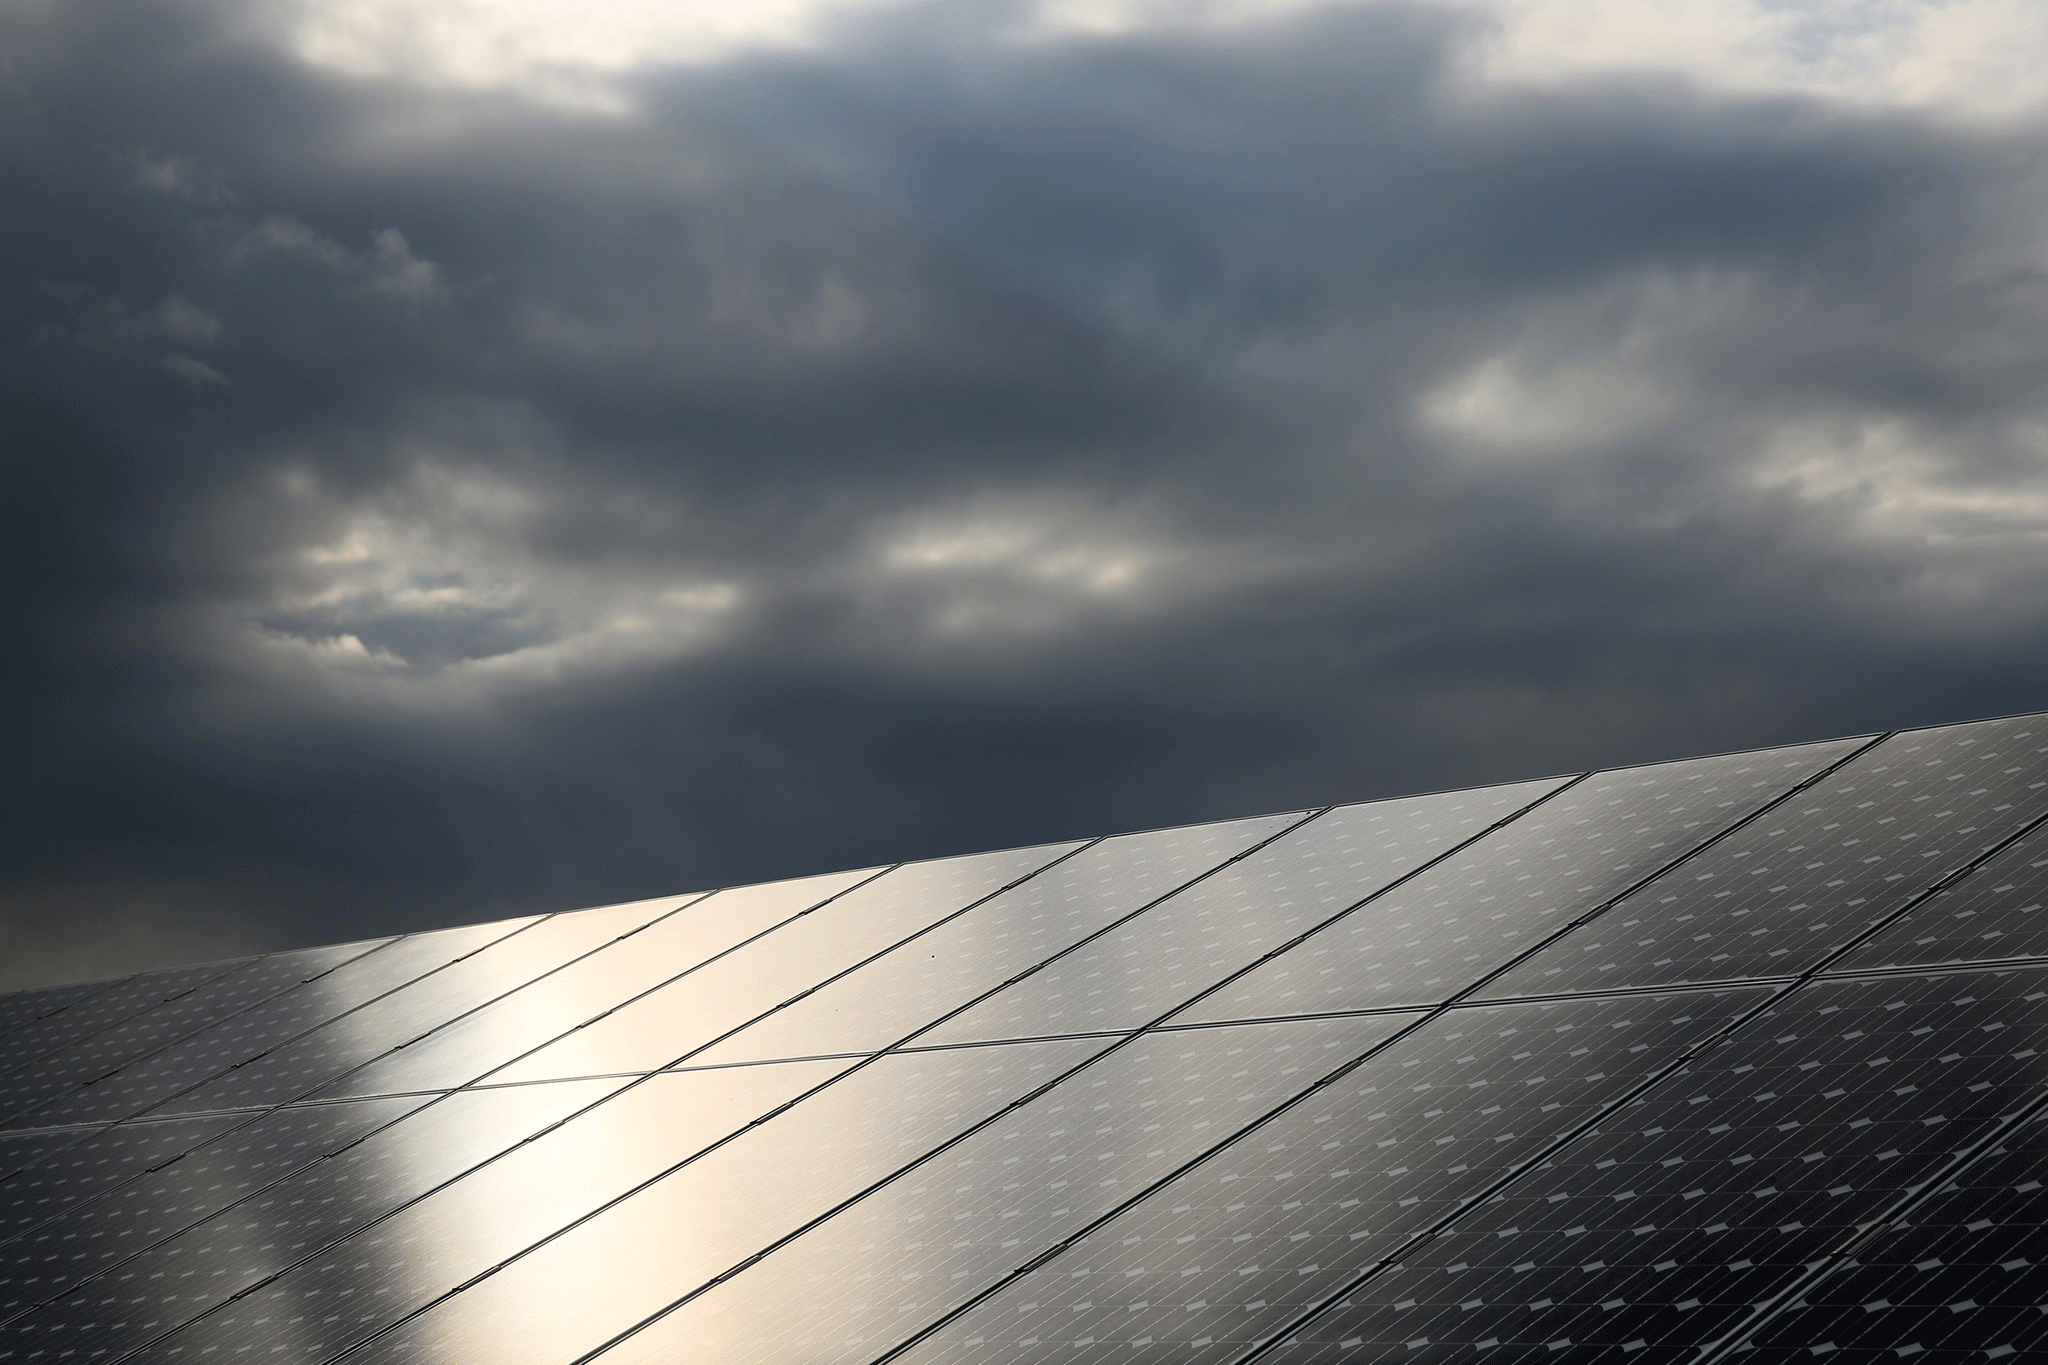 The solar power industry has suffered from the loss of government subsidies in the last year